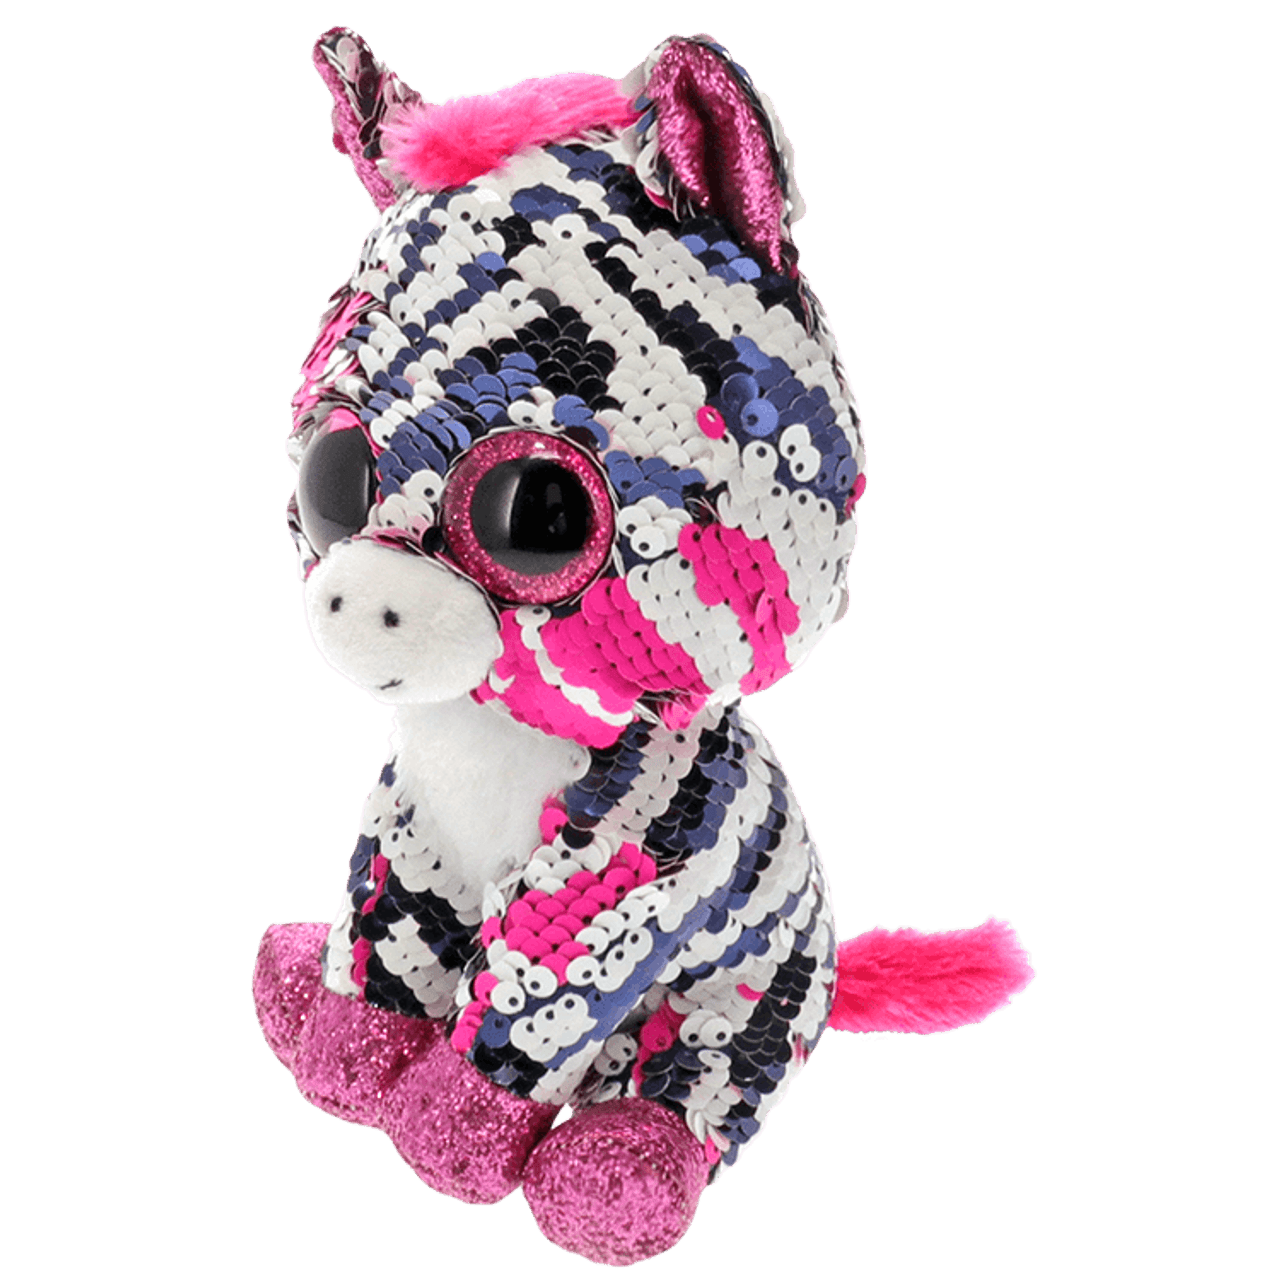 NEW TY BEANIES BOOS 2015 ~Zoey the Zebra pink~ 6 Stuffed toy /item#  R6SG5EB-48Q32049